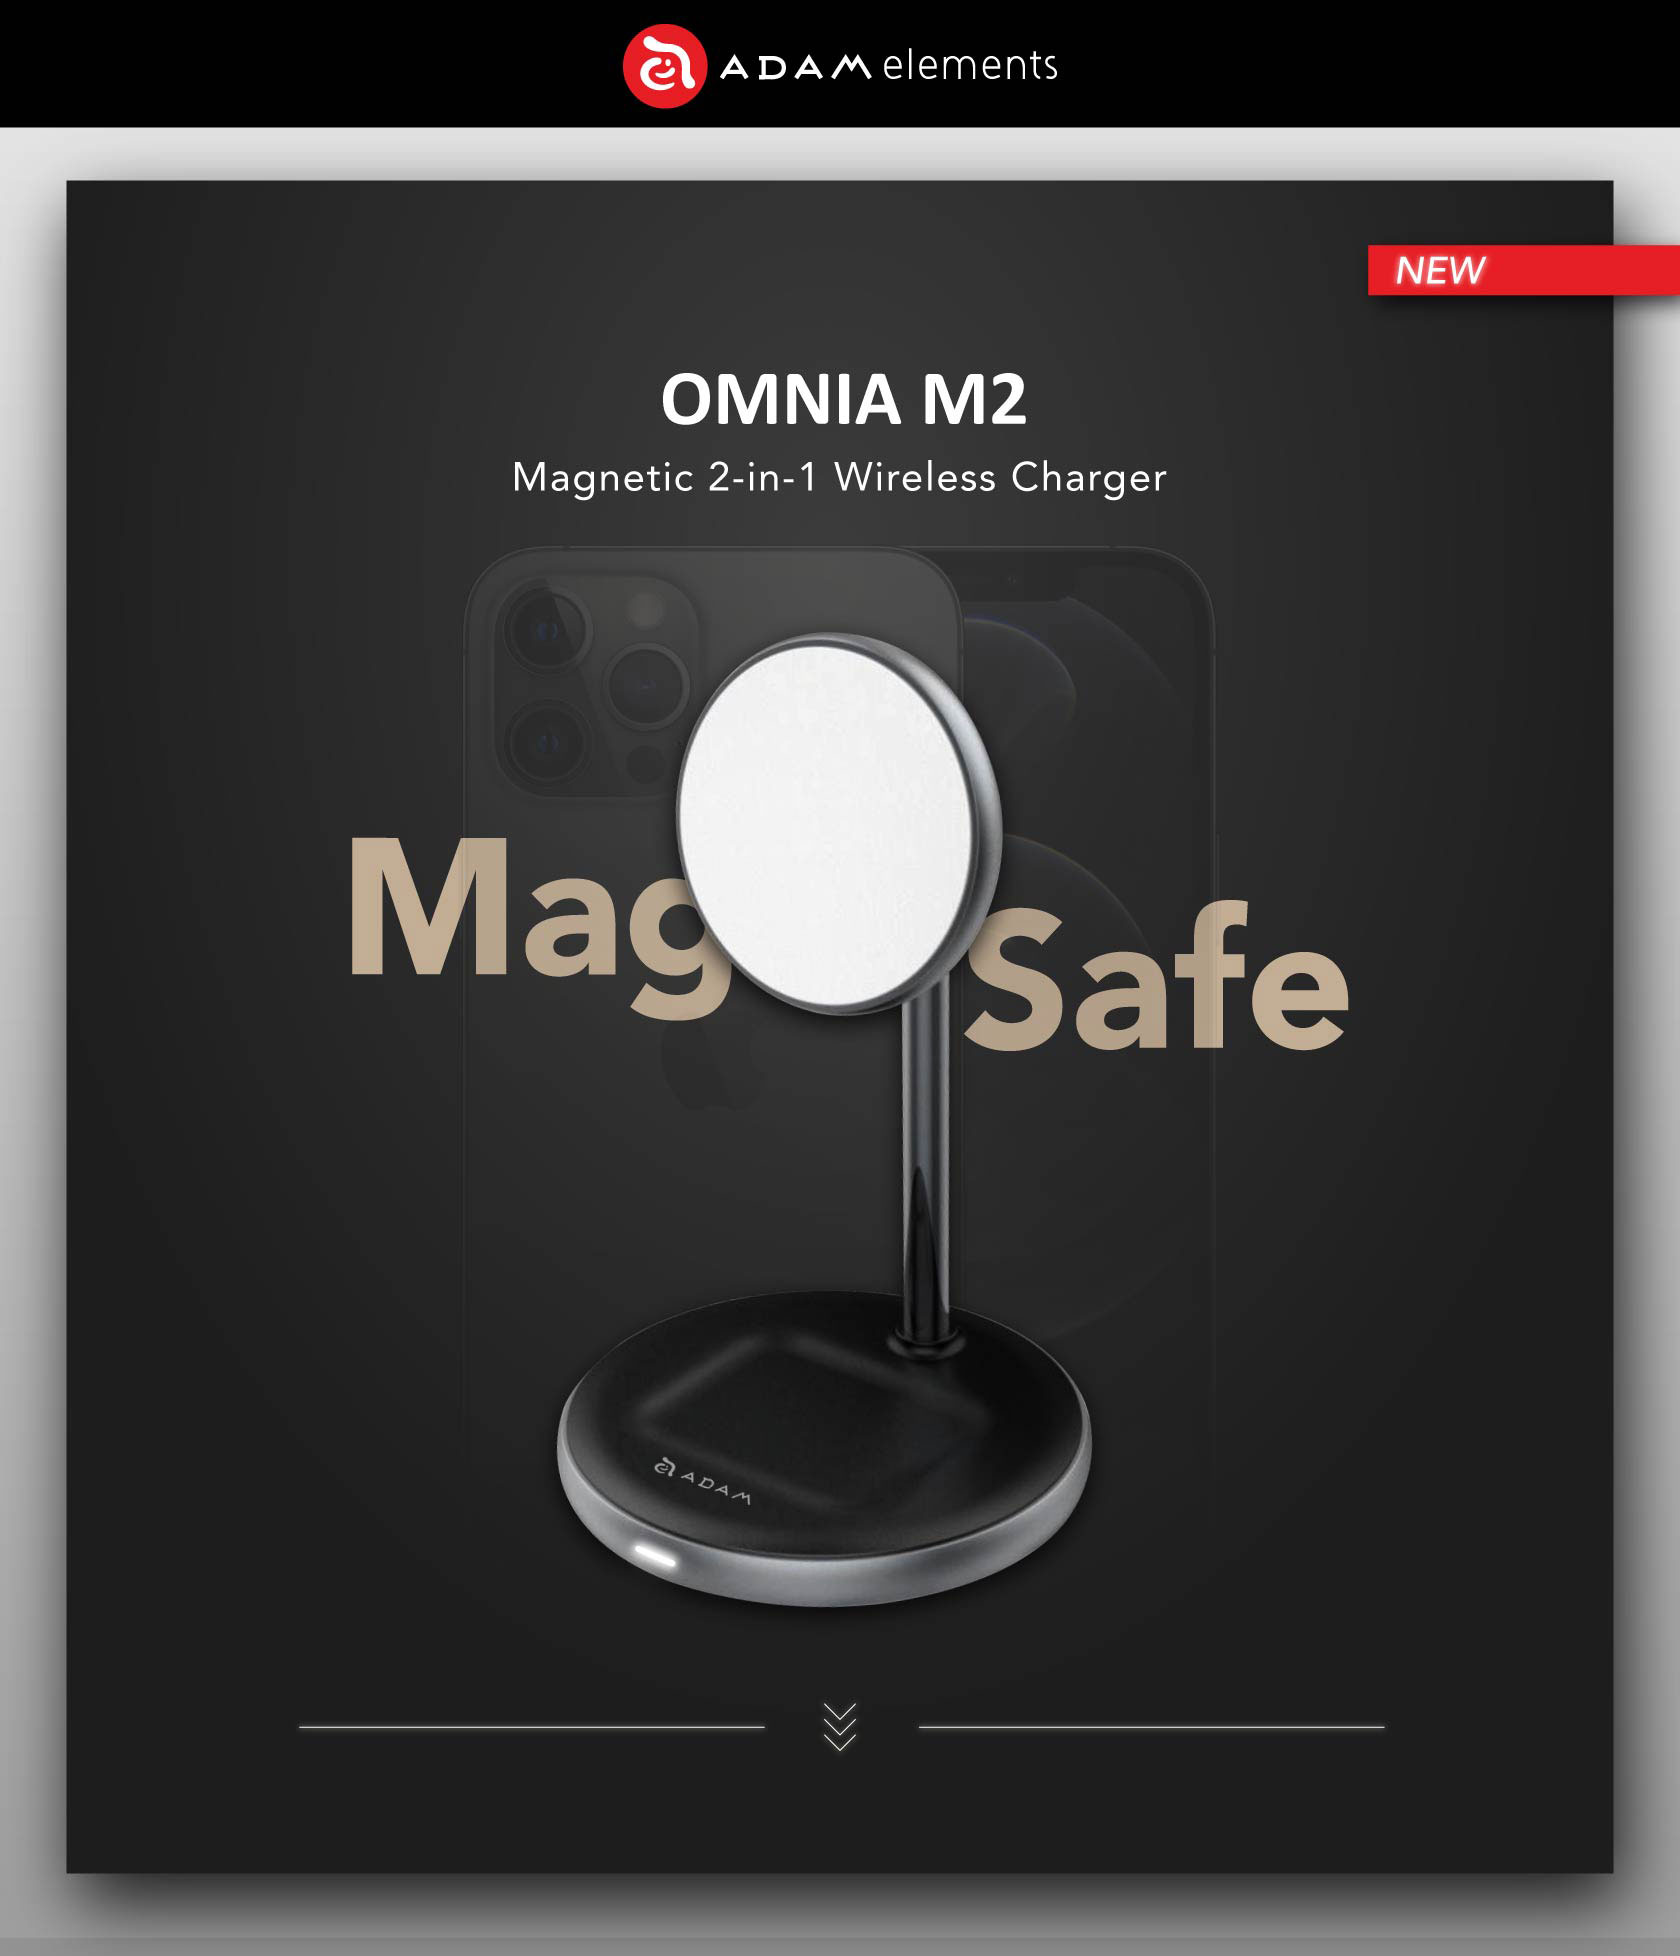 OMNIA M2 Magnetic 2 in 1 Wireless Charger 1